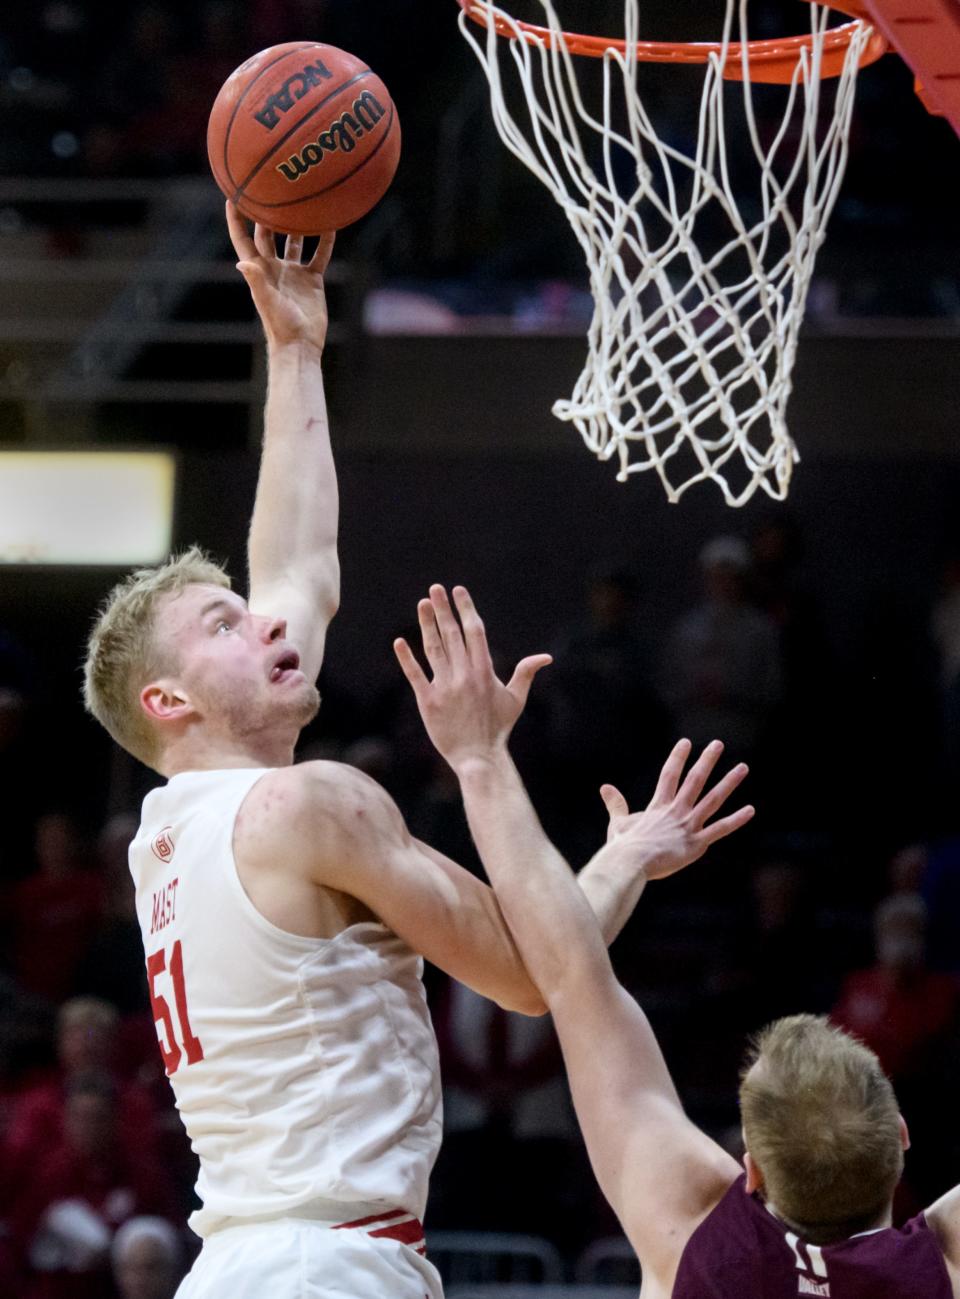 Bradley's Rienk Mast, left, puts up a shot over the Southern Illinois defense in the second half Saturday, Jan 22, 2022 at Carver Arean. Mast led all scorers with 20 points, helping the Braves defeat the Salukis 70-62.